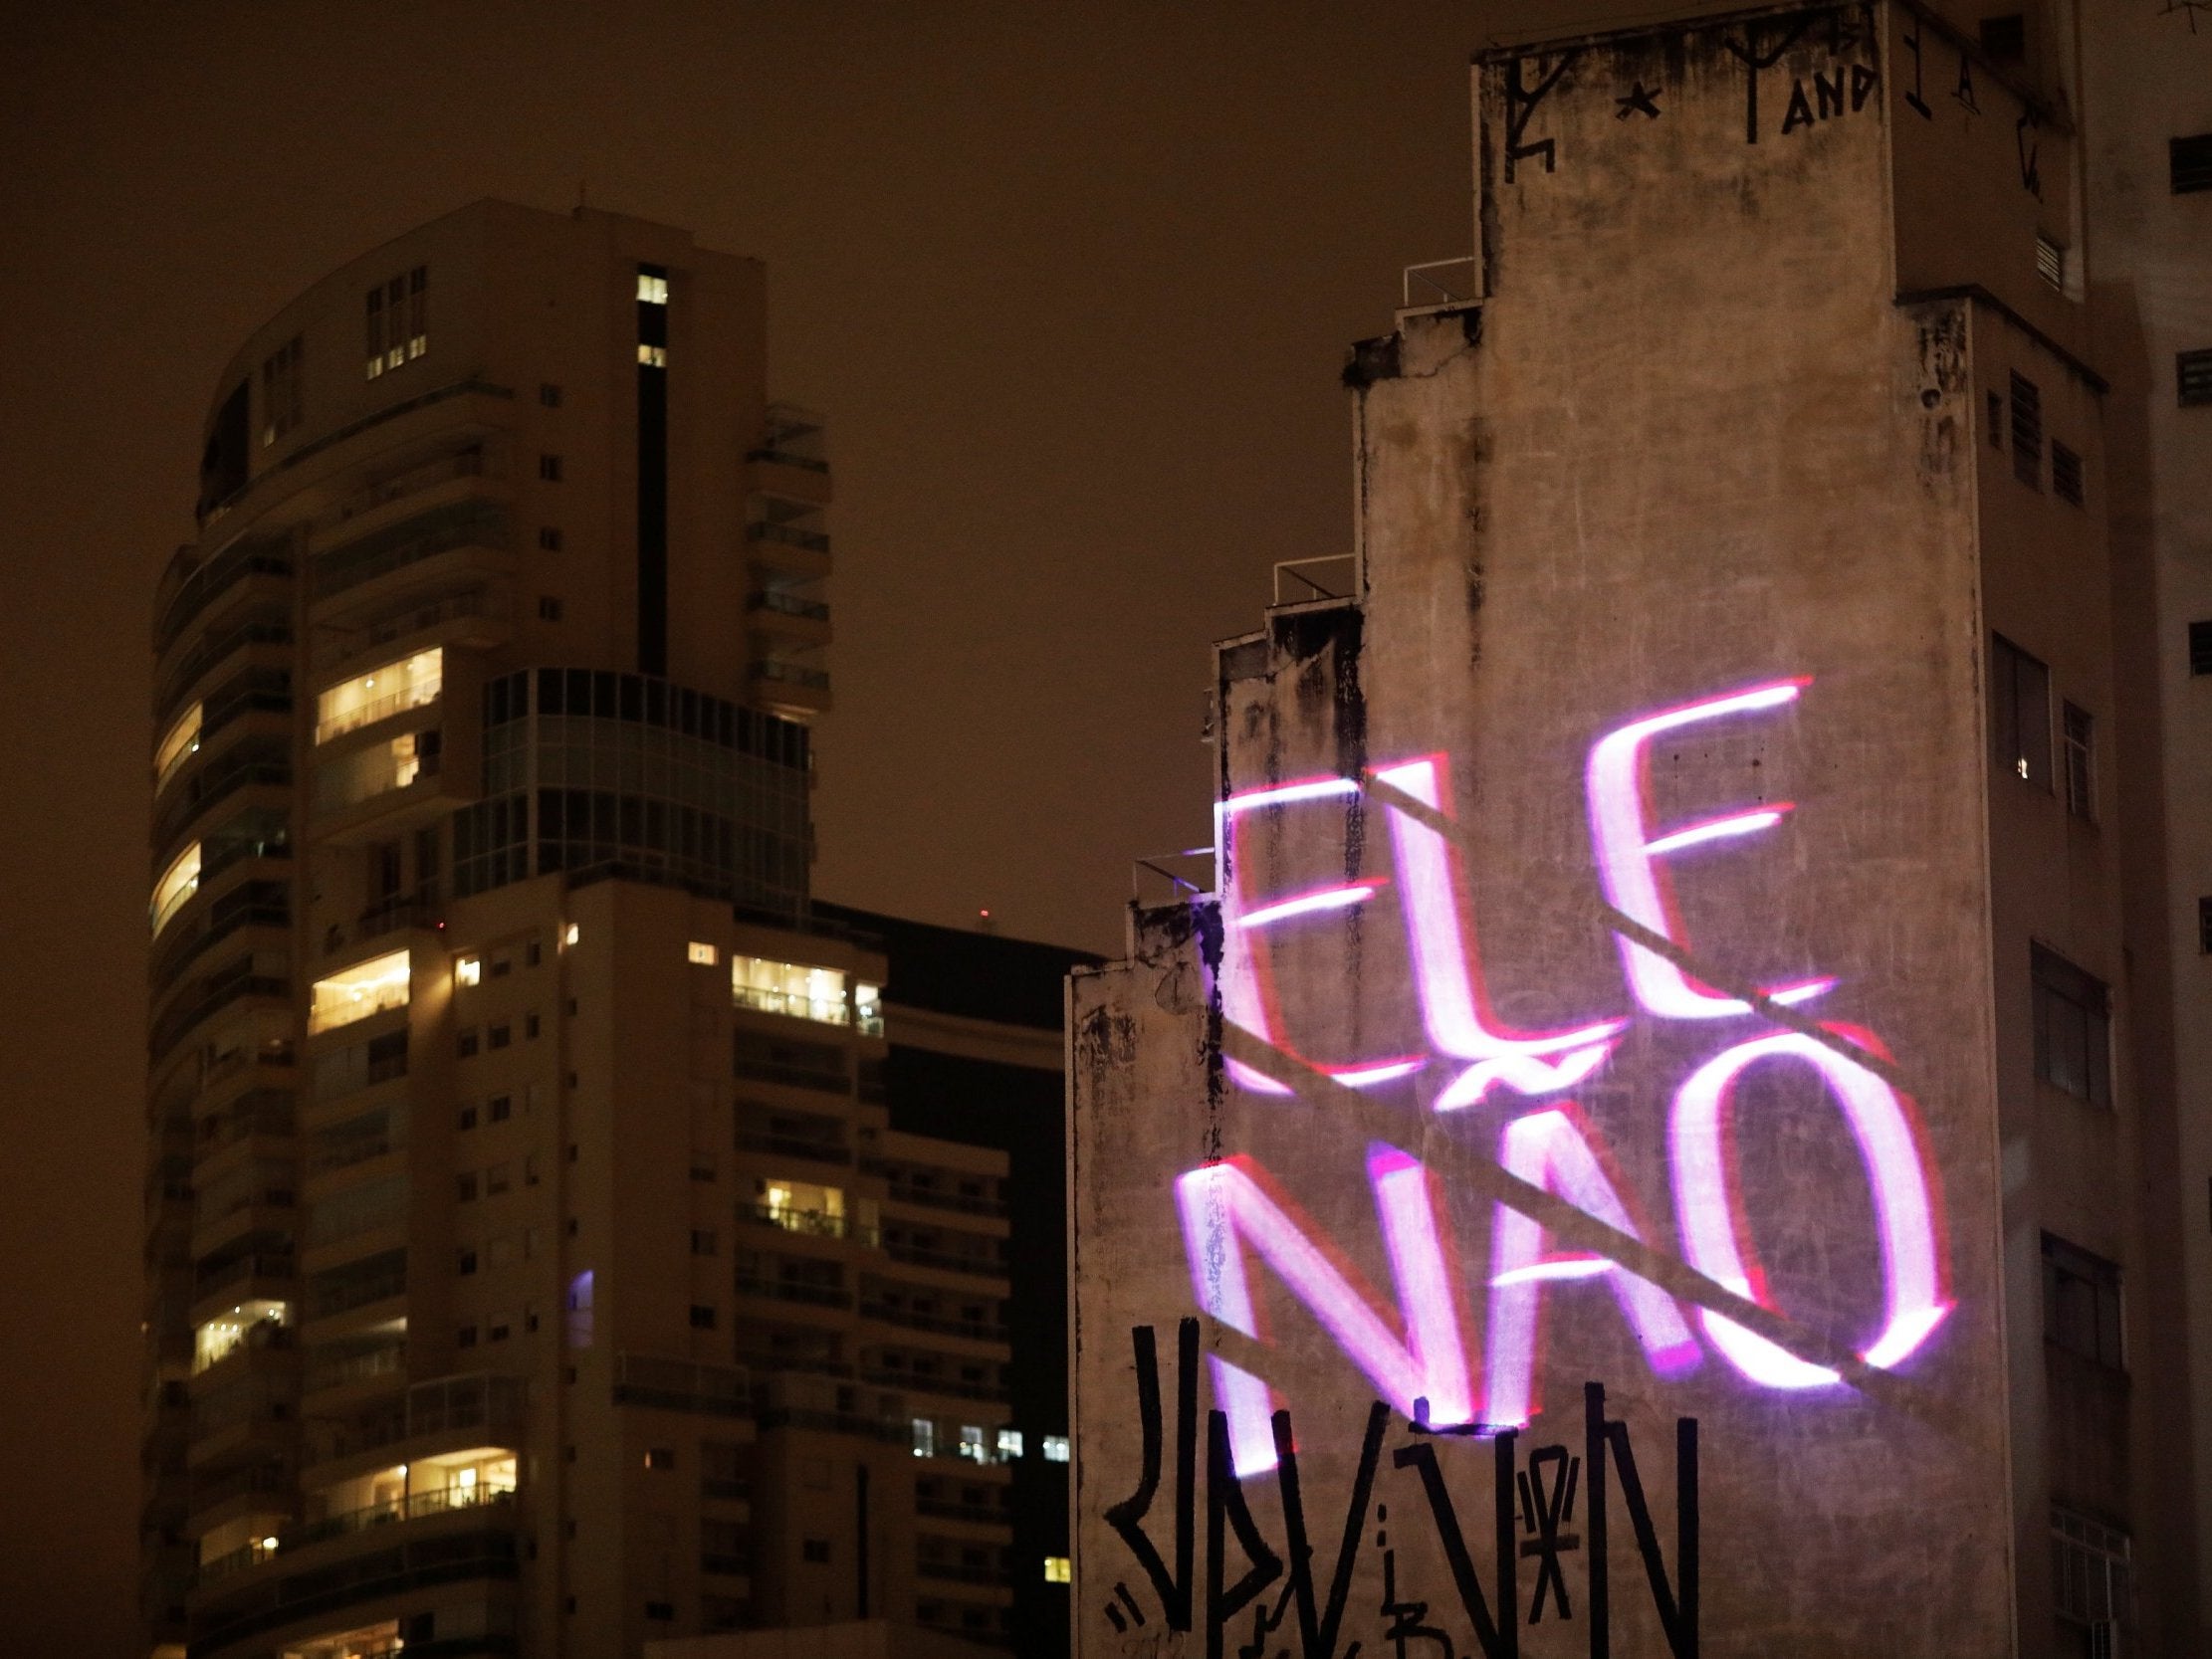 The phrase "#NotHim" projected on Sao Paulo building in reference to candidate Jair Bolsonaro